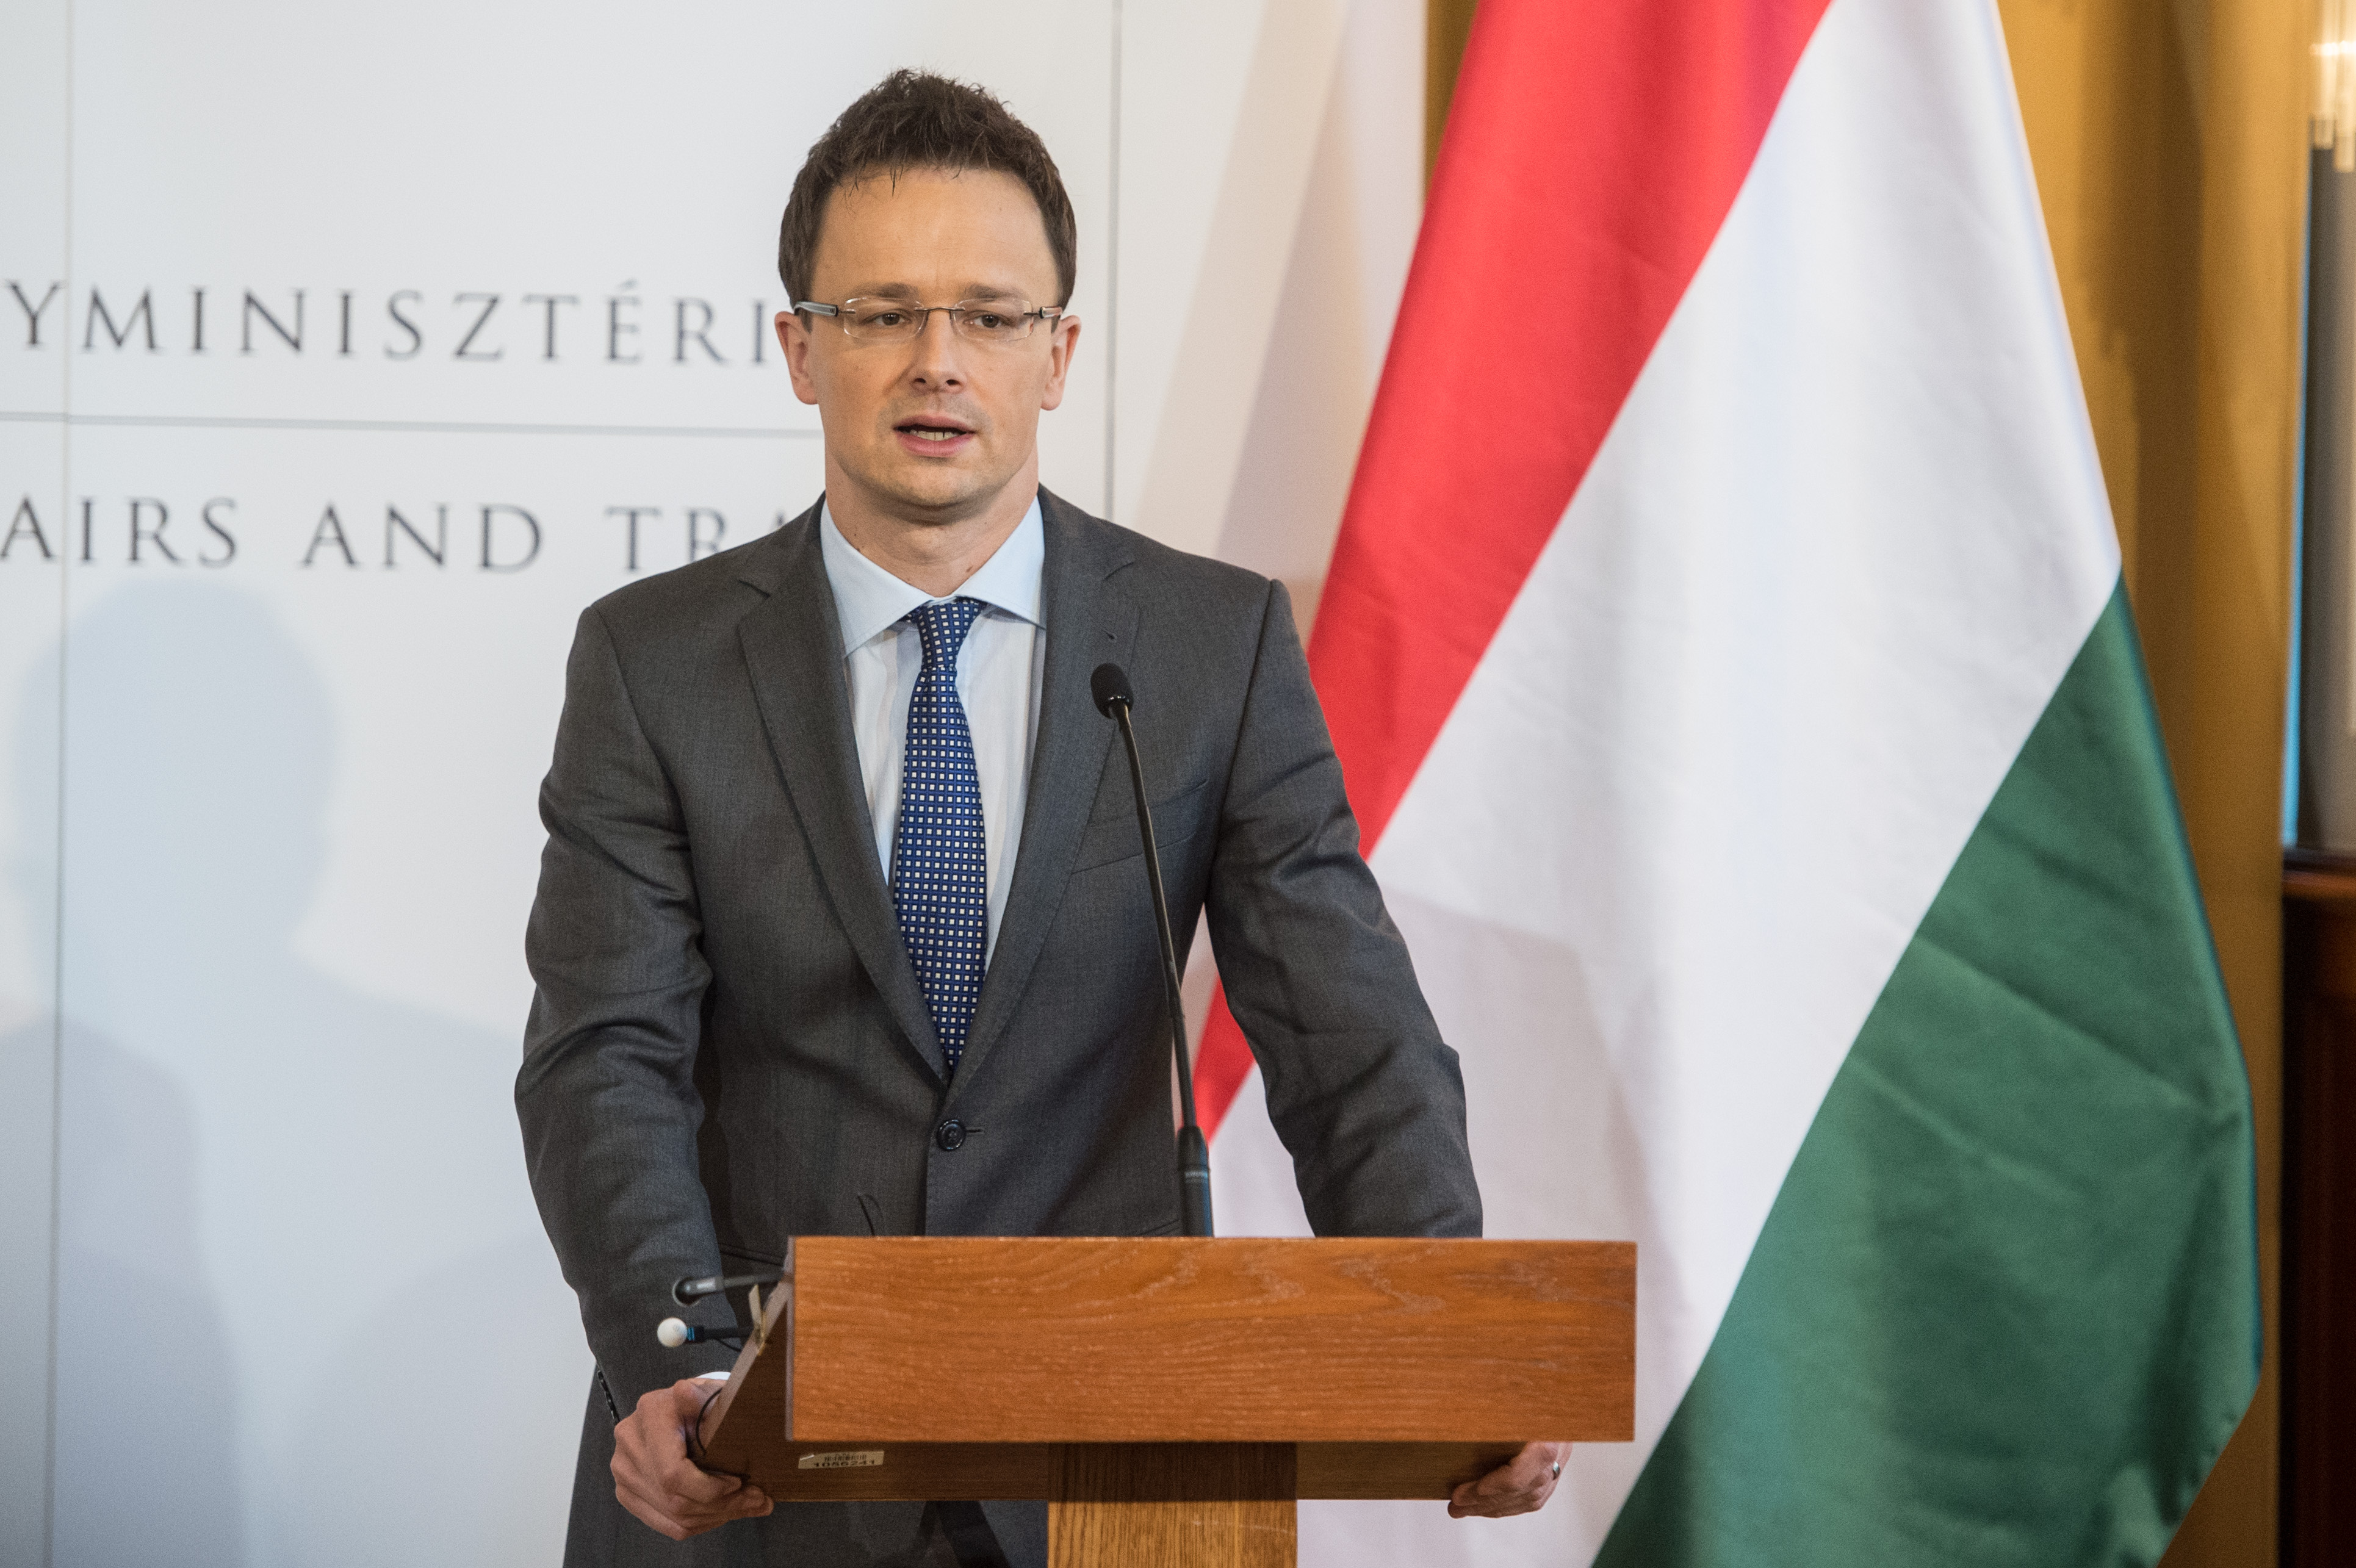 Hungary To Ease Restrictions Before “Almost Any Other Country In Europe